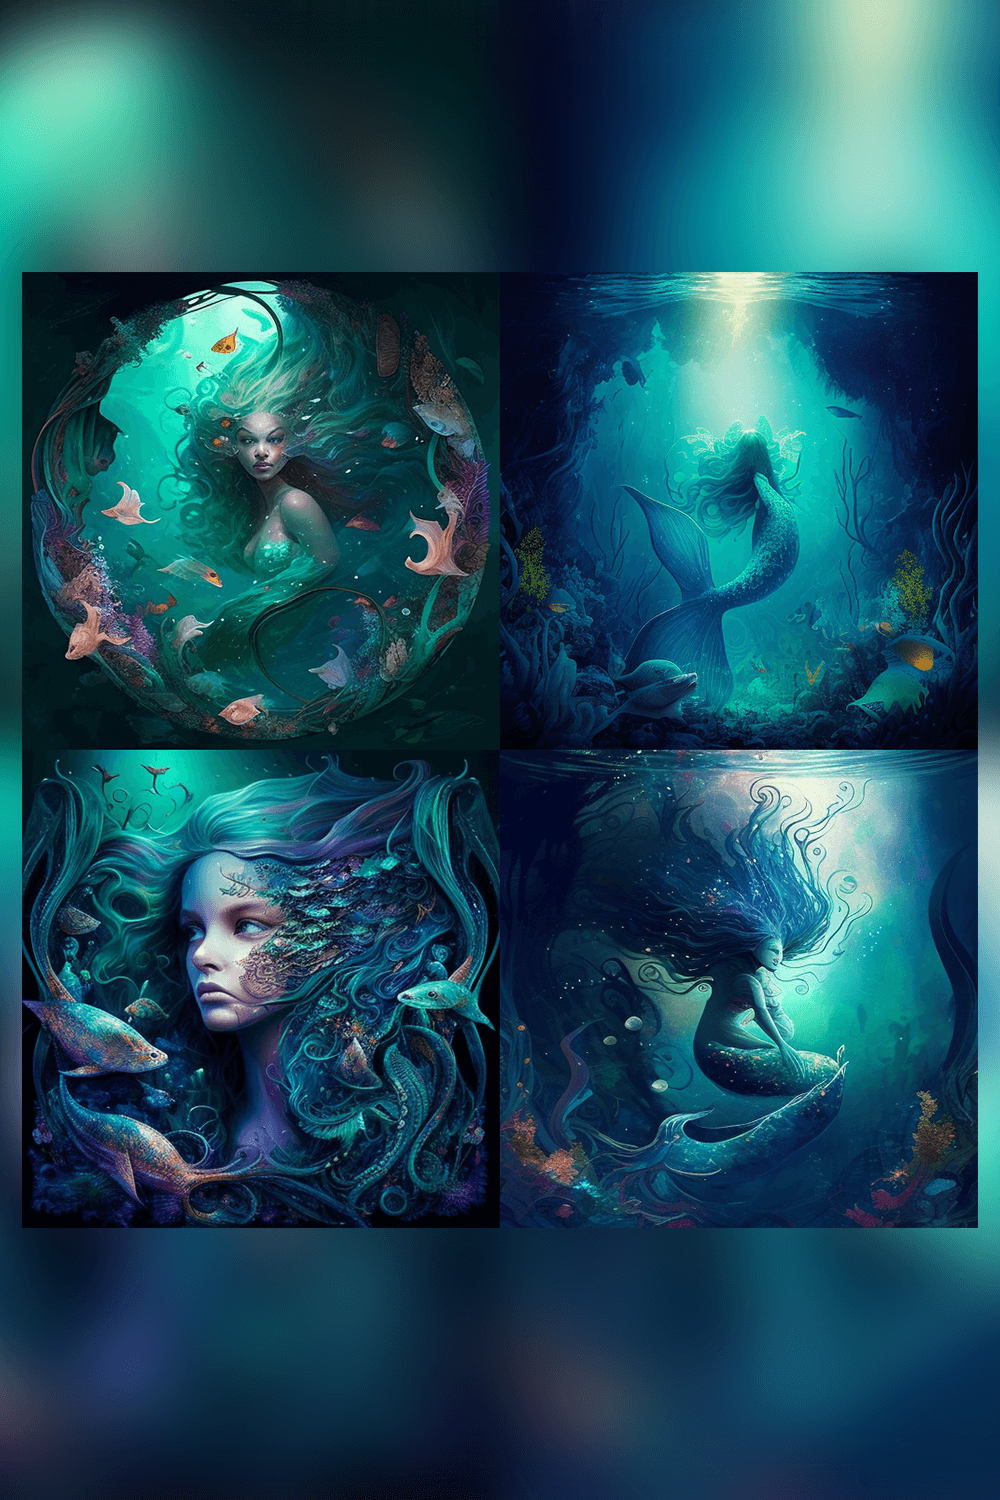 Series of four photos of mermaids in the water.